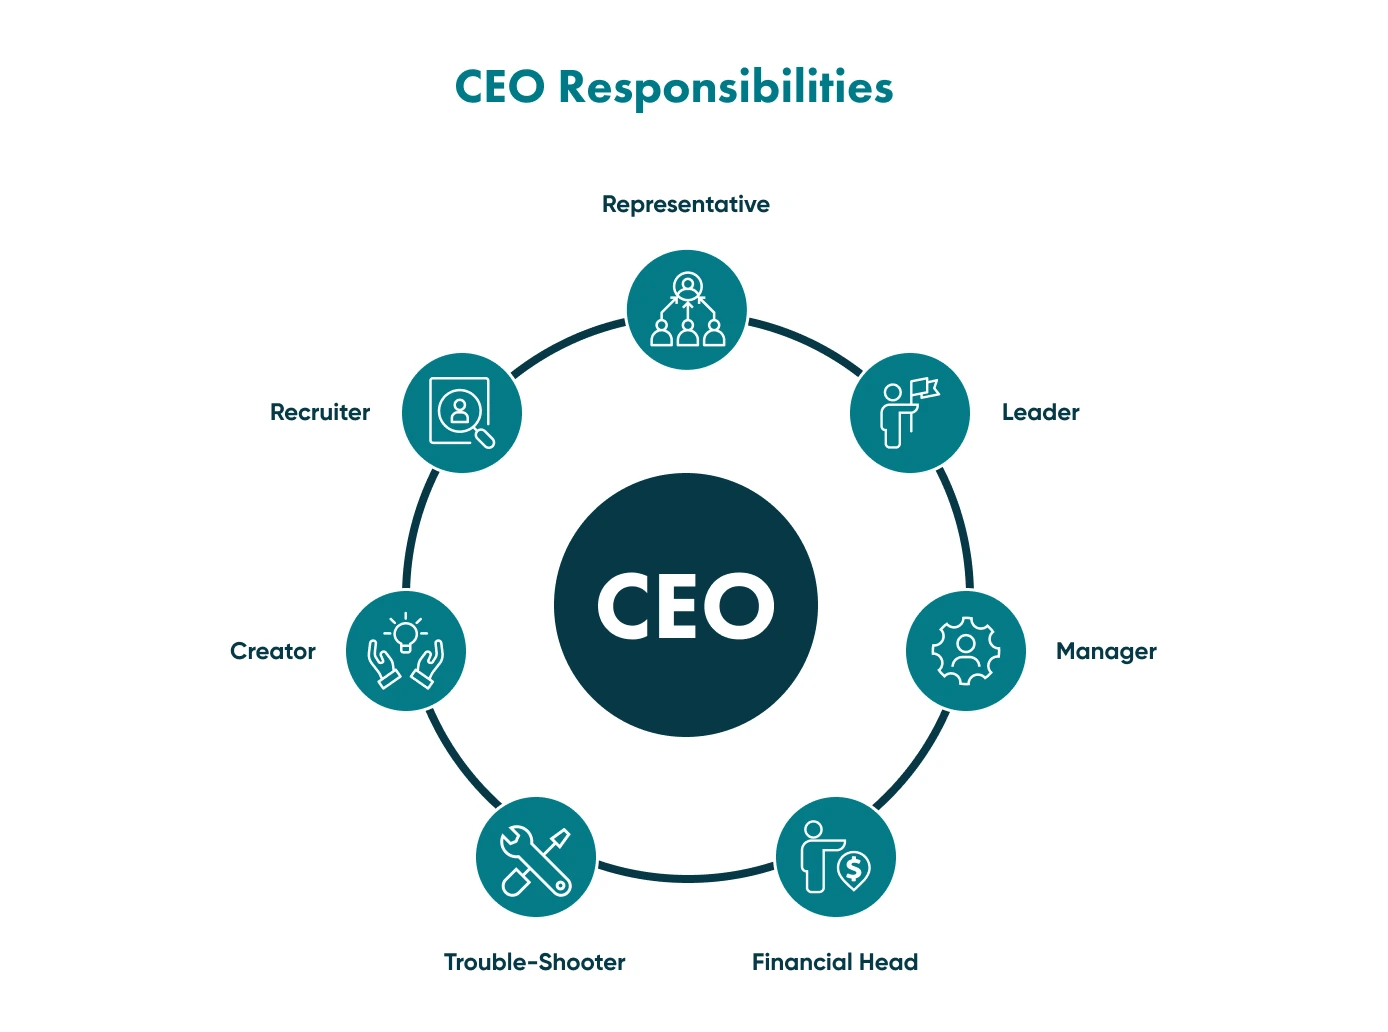 Qualities and responsibilities of a CEO.